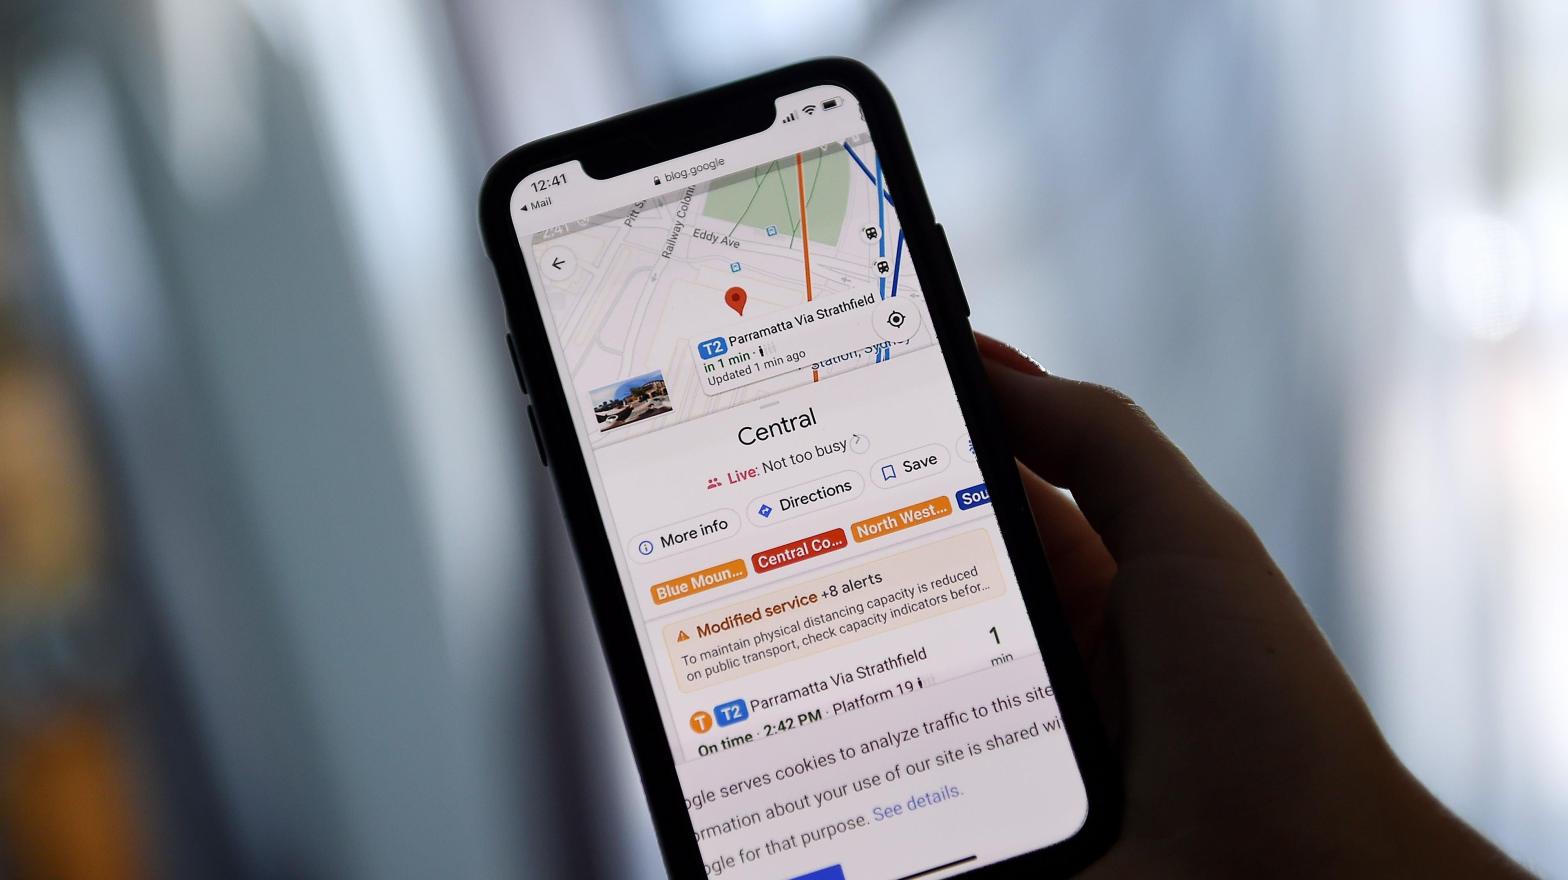 A strike by Google Maps employees could have resulted in service hiccups for the software's billion monthly users.  (Photo: OLIVIER DOULIERY, Getty Images)